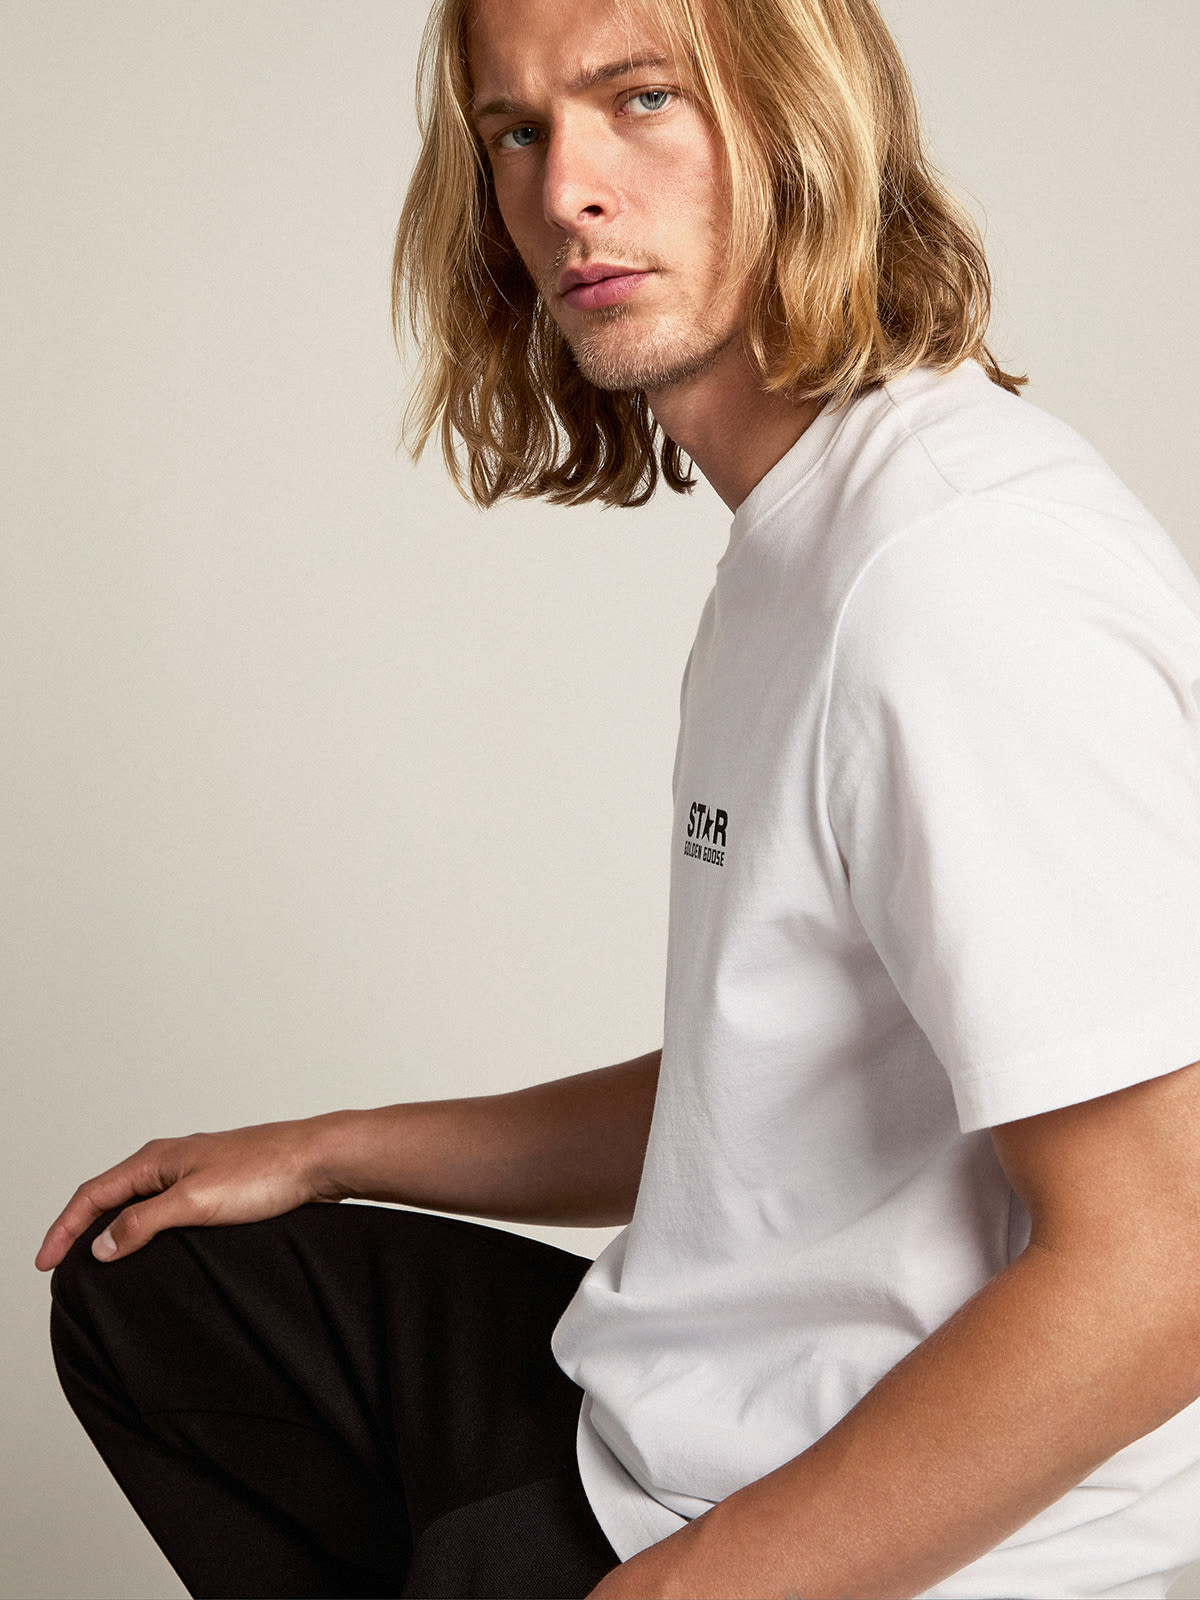 Golden Goose - White Star Collection T-shirt with contrasting black logo and star in 